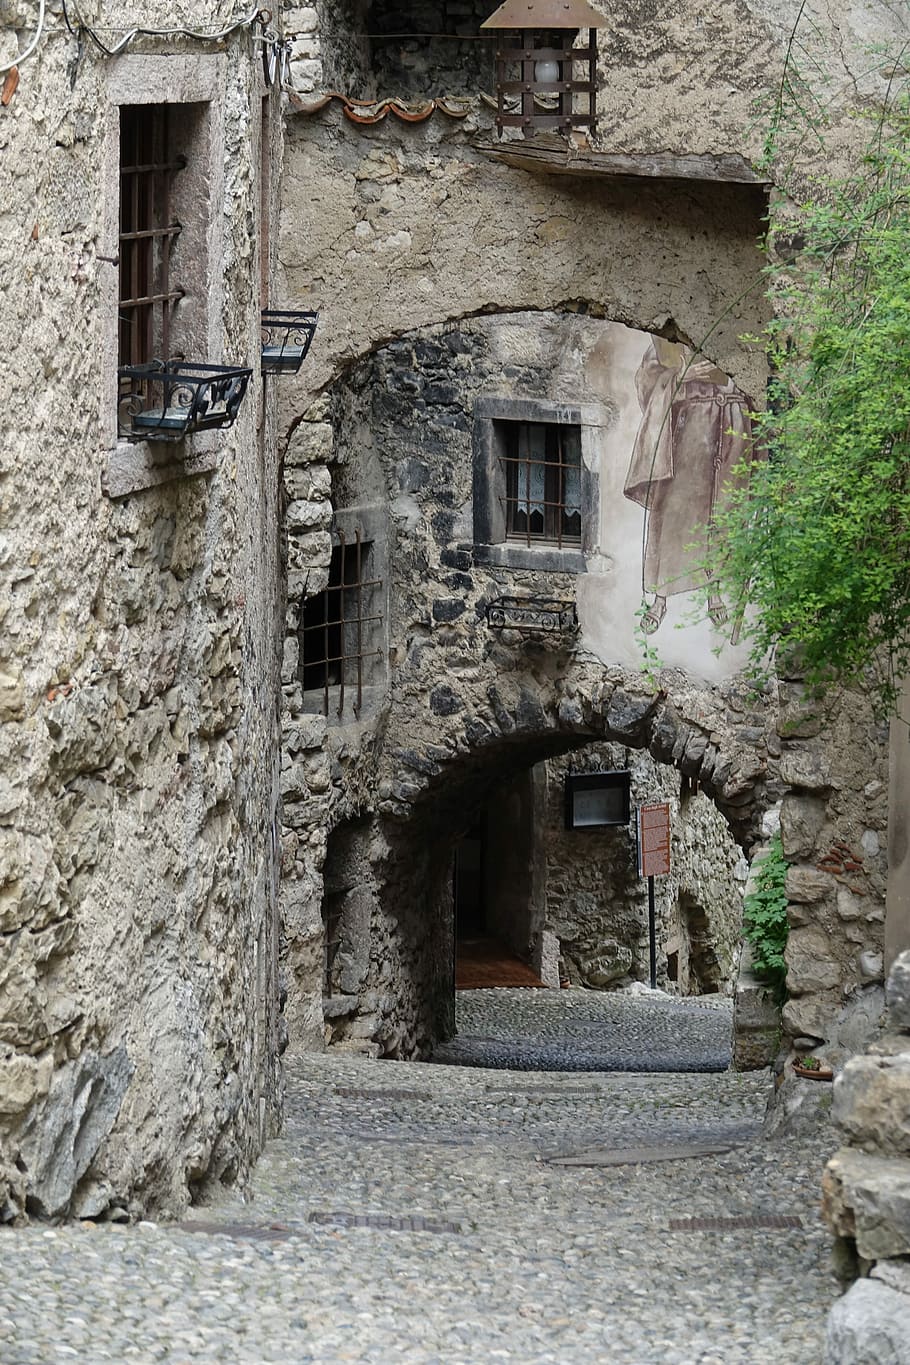 Italy, Village, Trentino, stone material, architecture, history, medieval, door, town, built structure